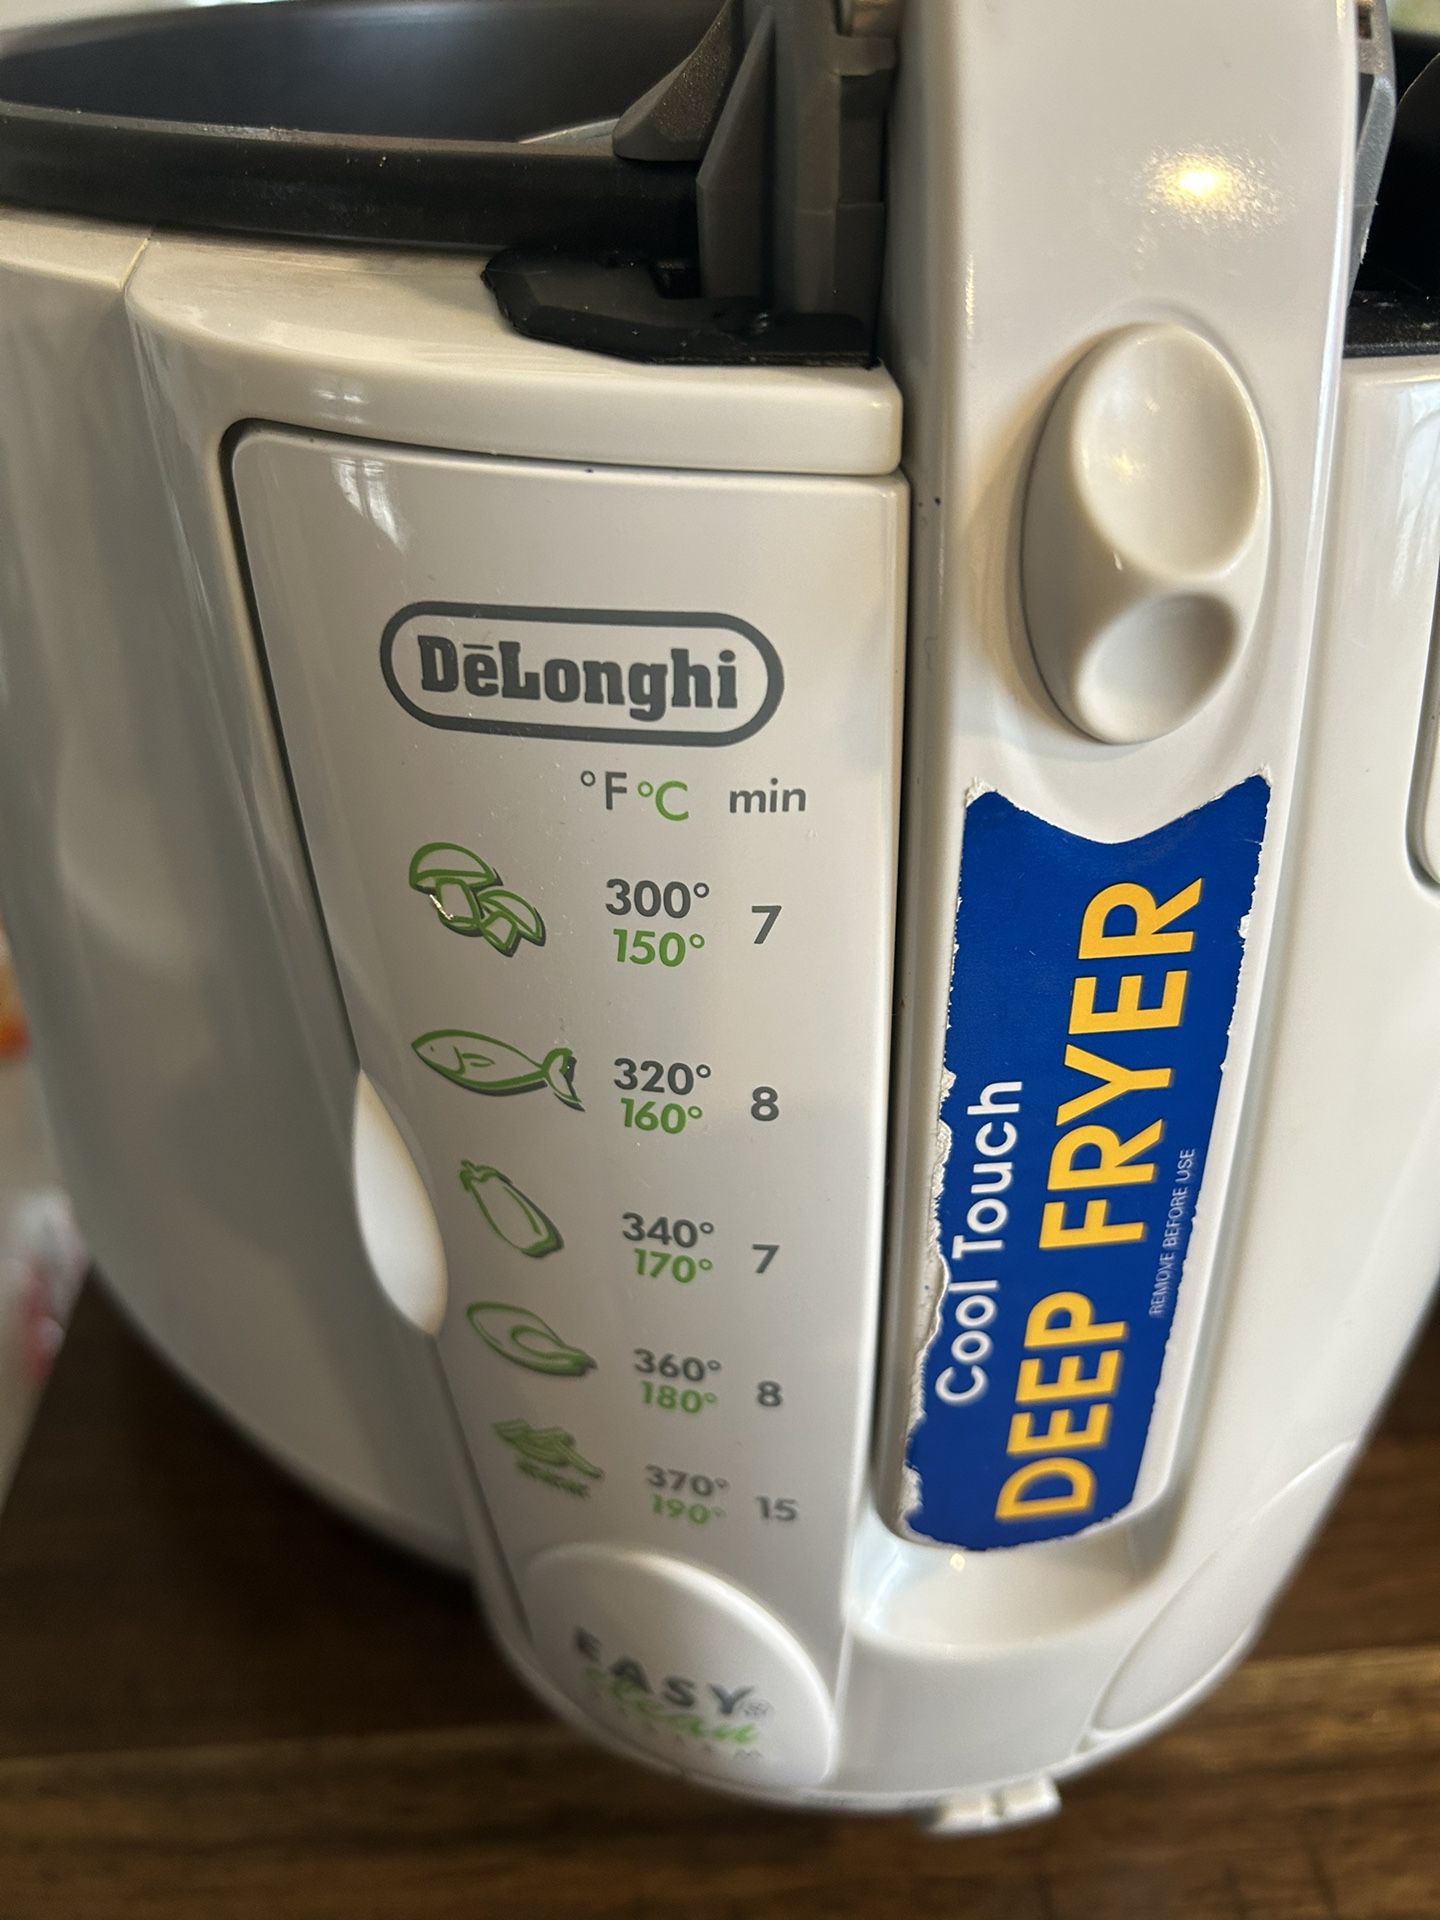 DeLonghi D677UX 2-1/5-Pound-Capacity Deep Fryer for Sale in Clear Brook, VA  - OfferUp